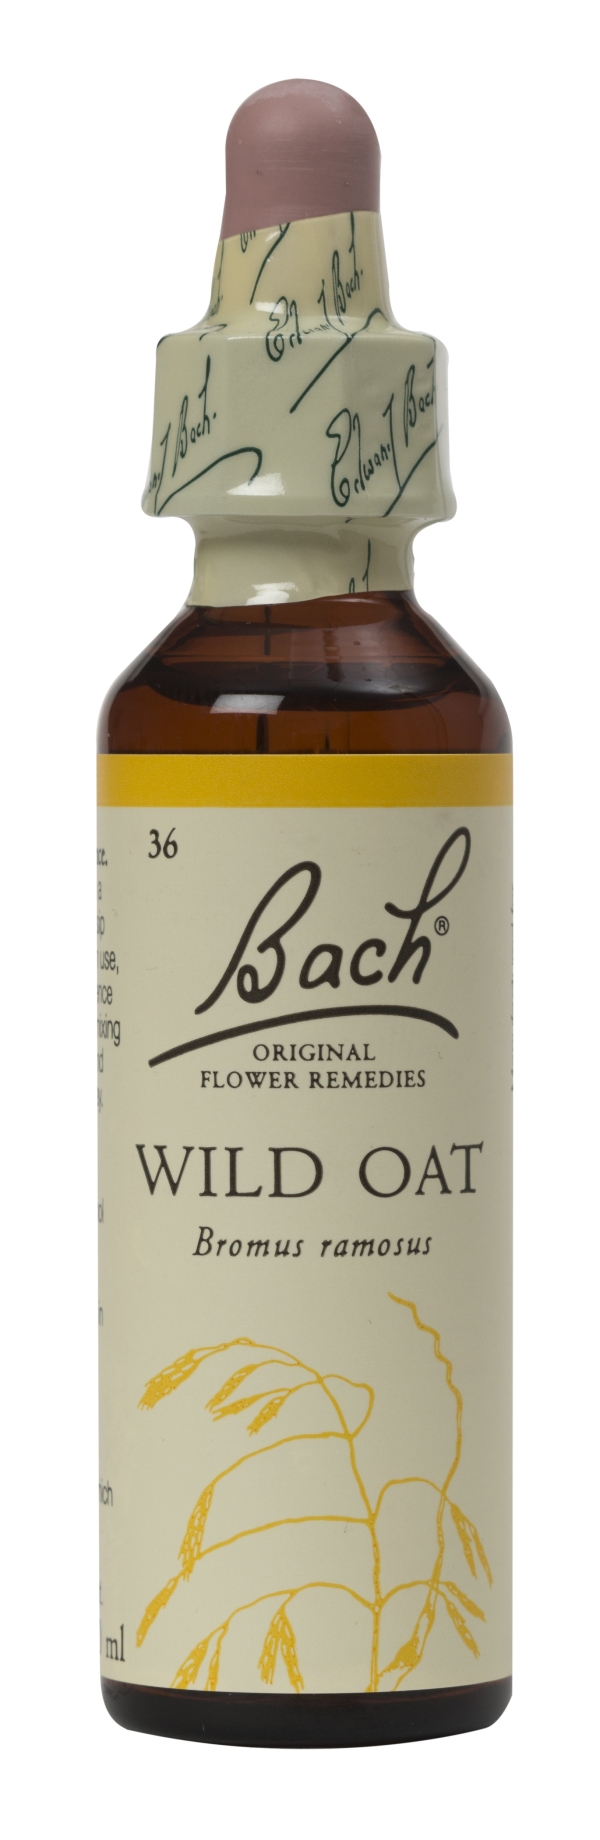 Nelson Bach Flower Remedies: Bach Wild Oat Flower Remedy (20ml) available online here